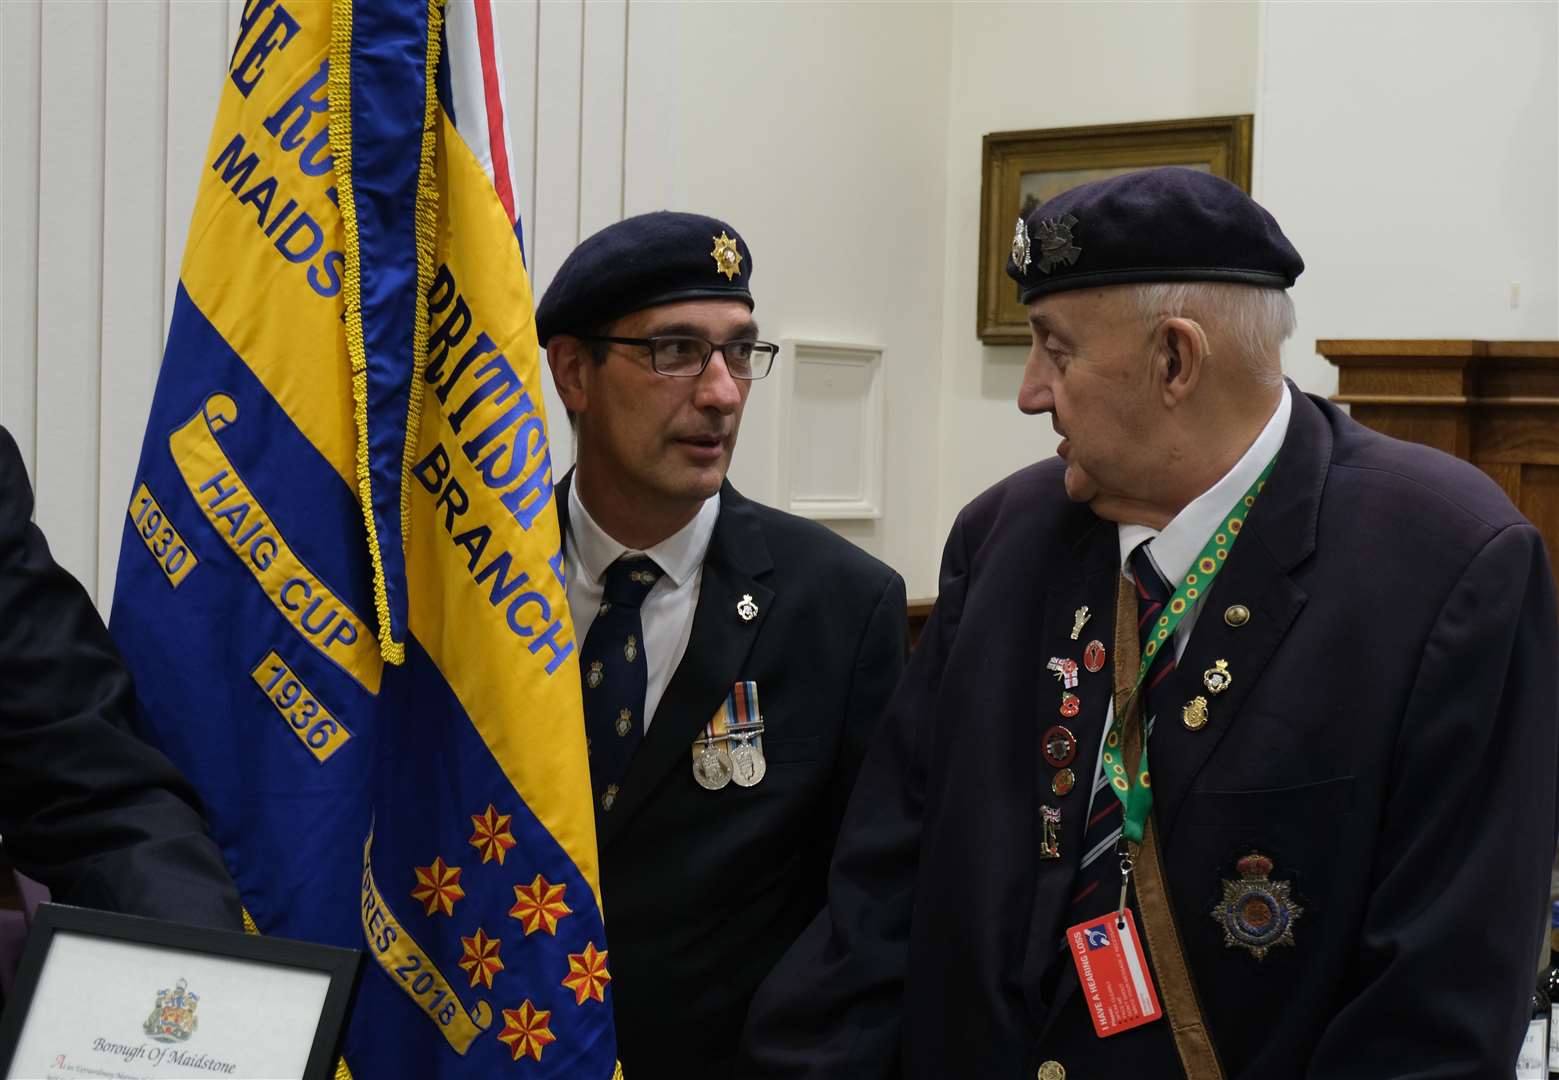 Members of the Royal British Legion were in the audience. All photos courtesy of Peter Cooper